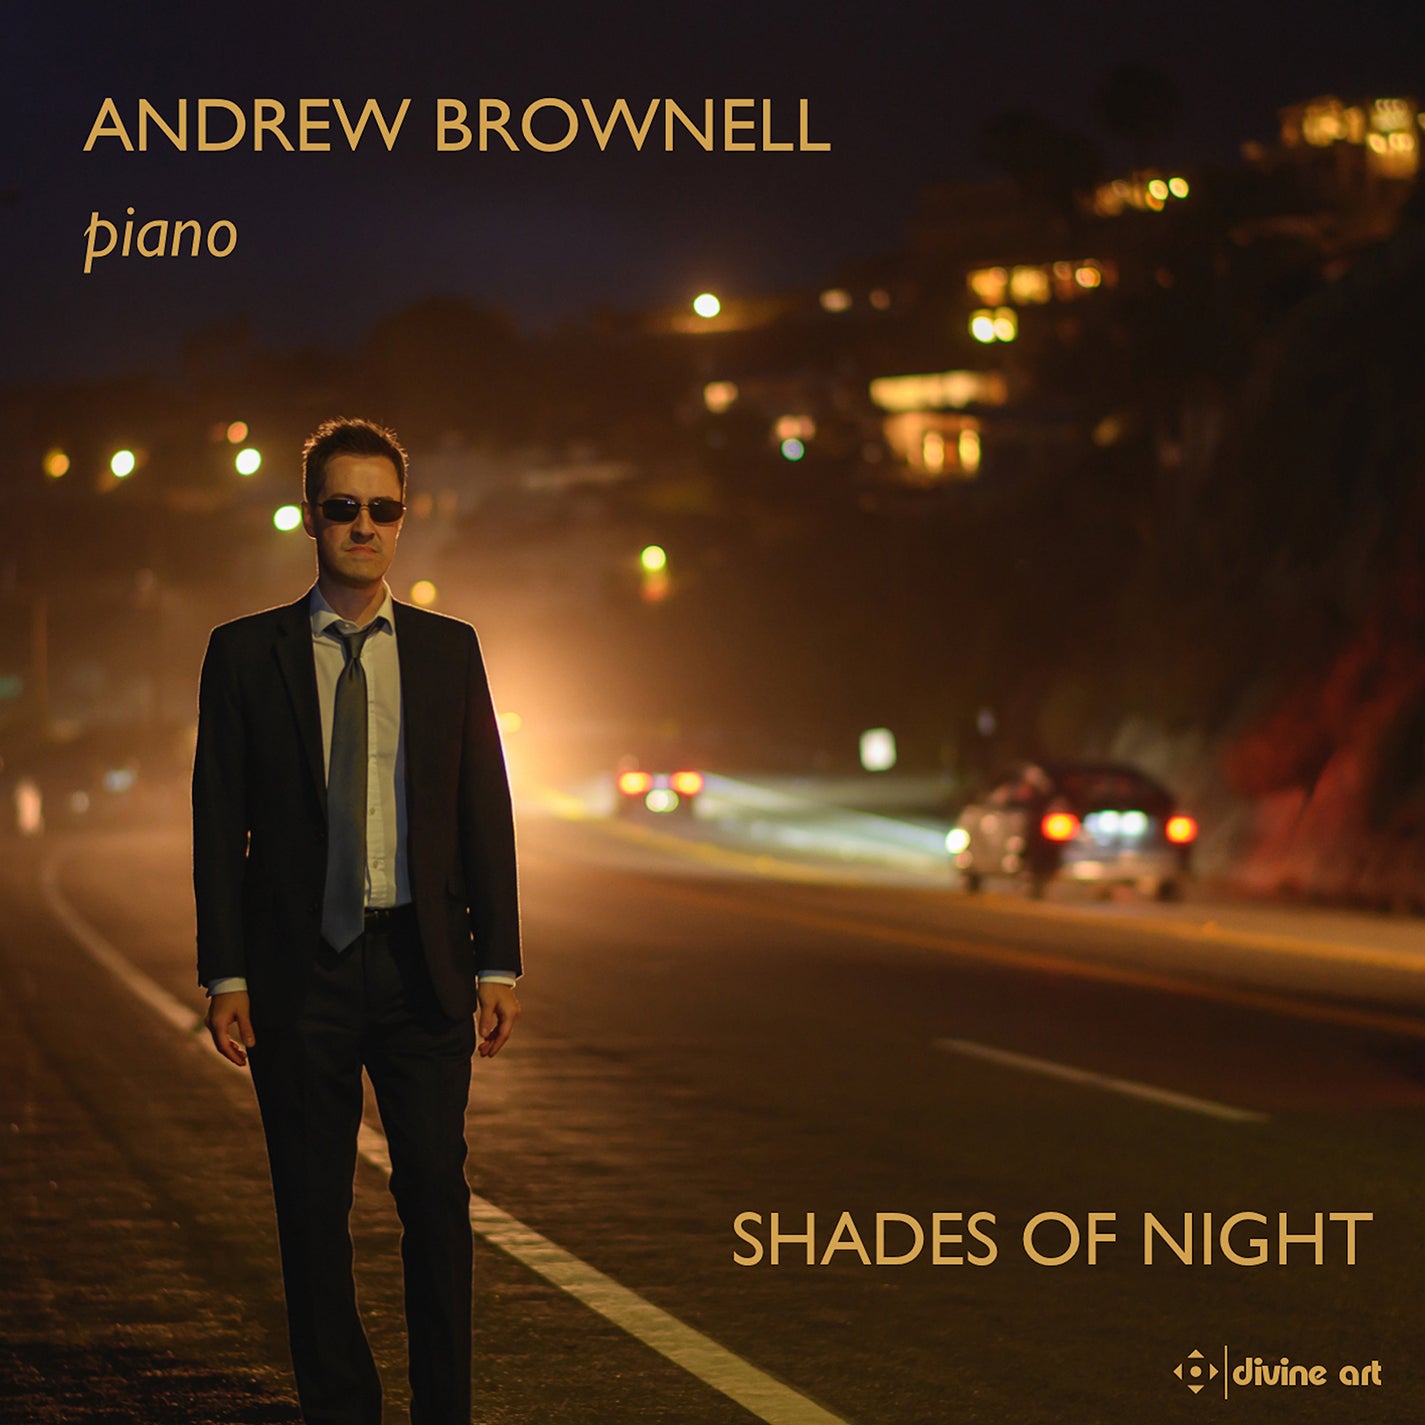 Shades of Night - Nocturnal Music from Couperin to Liebermann / Brownell